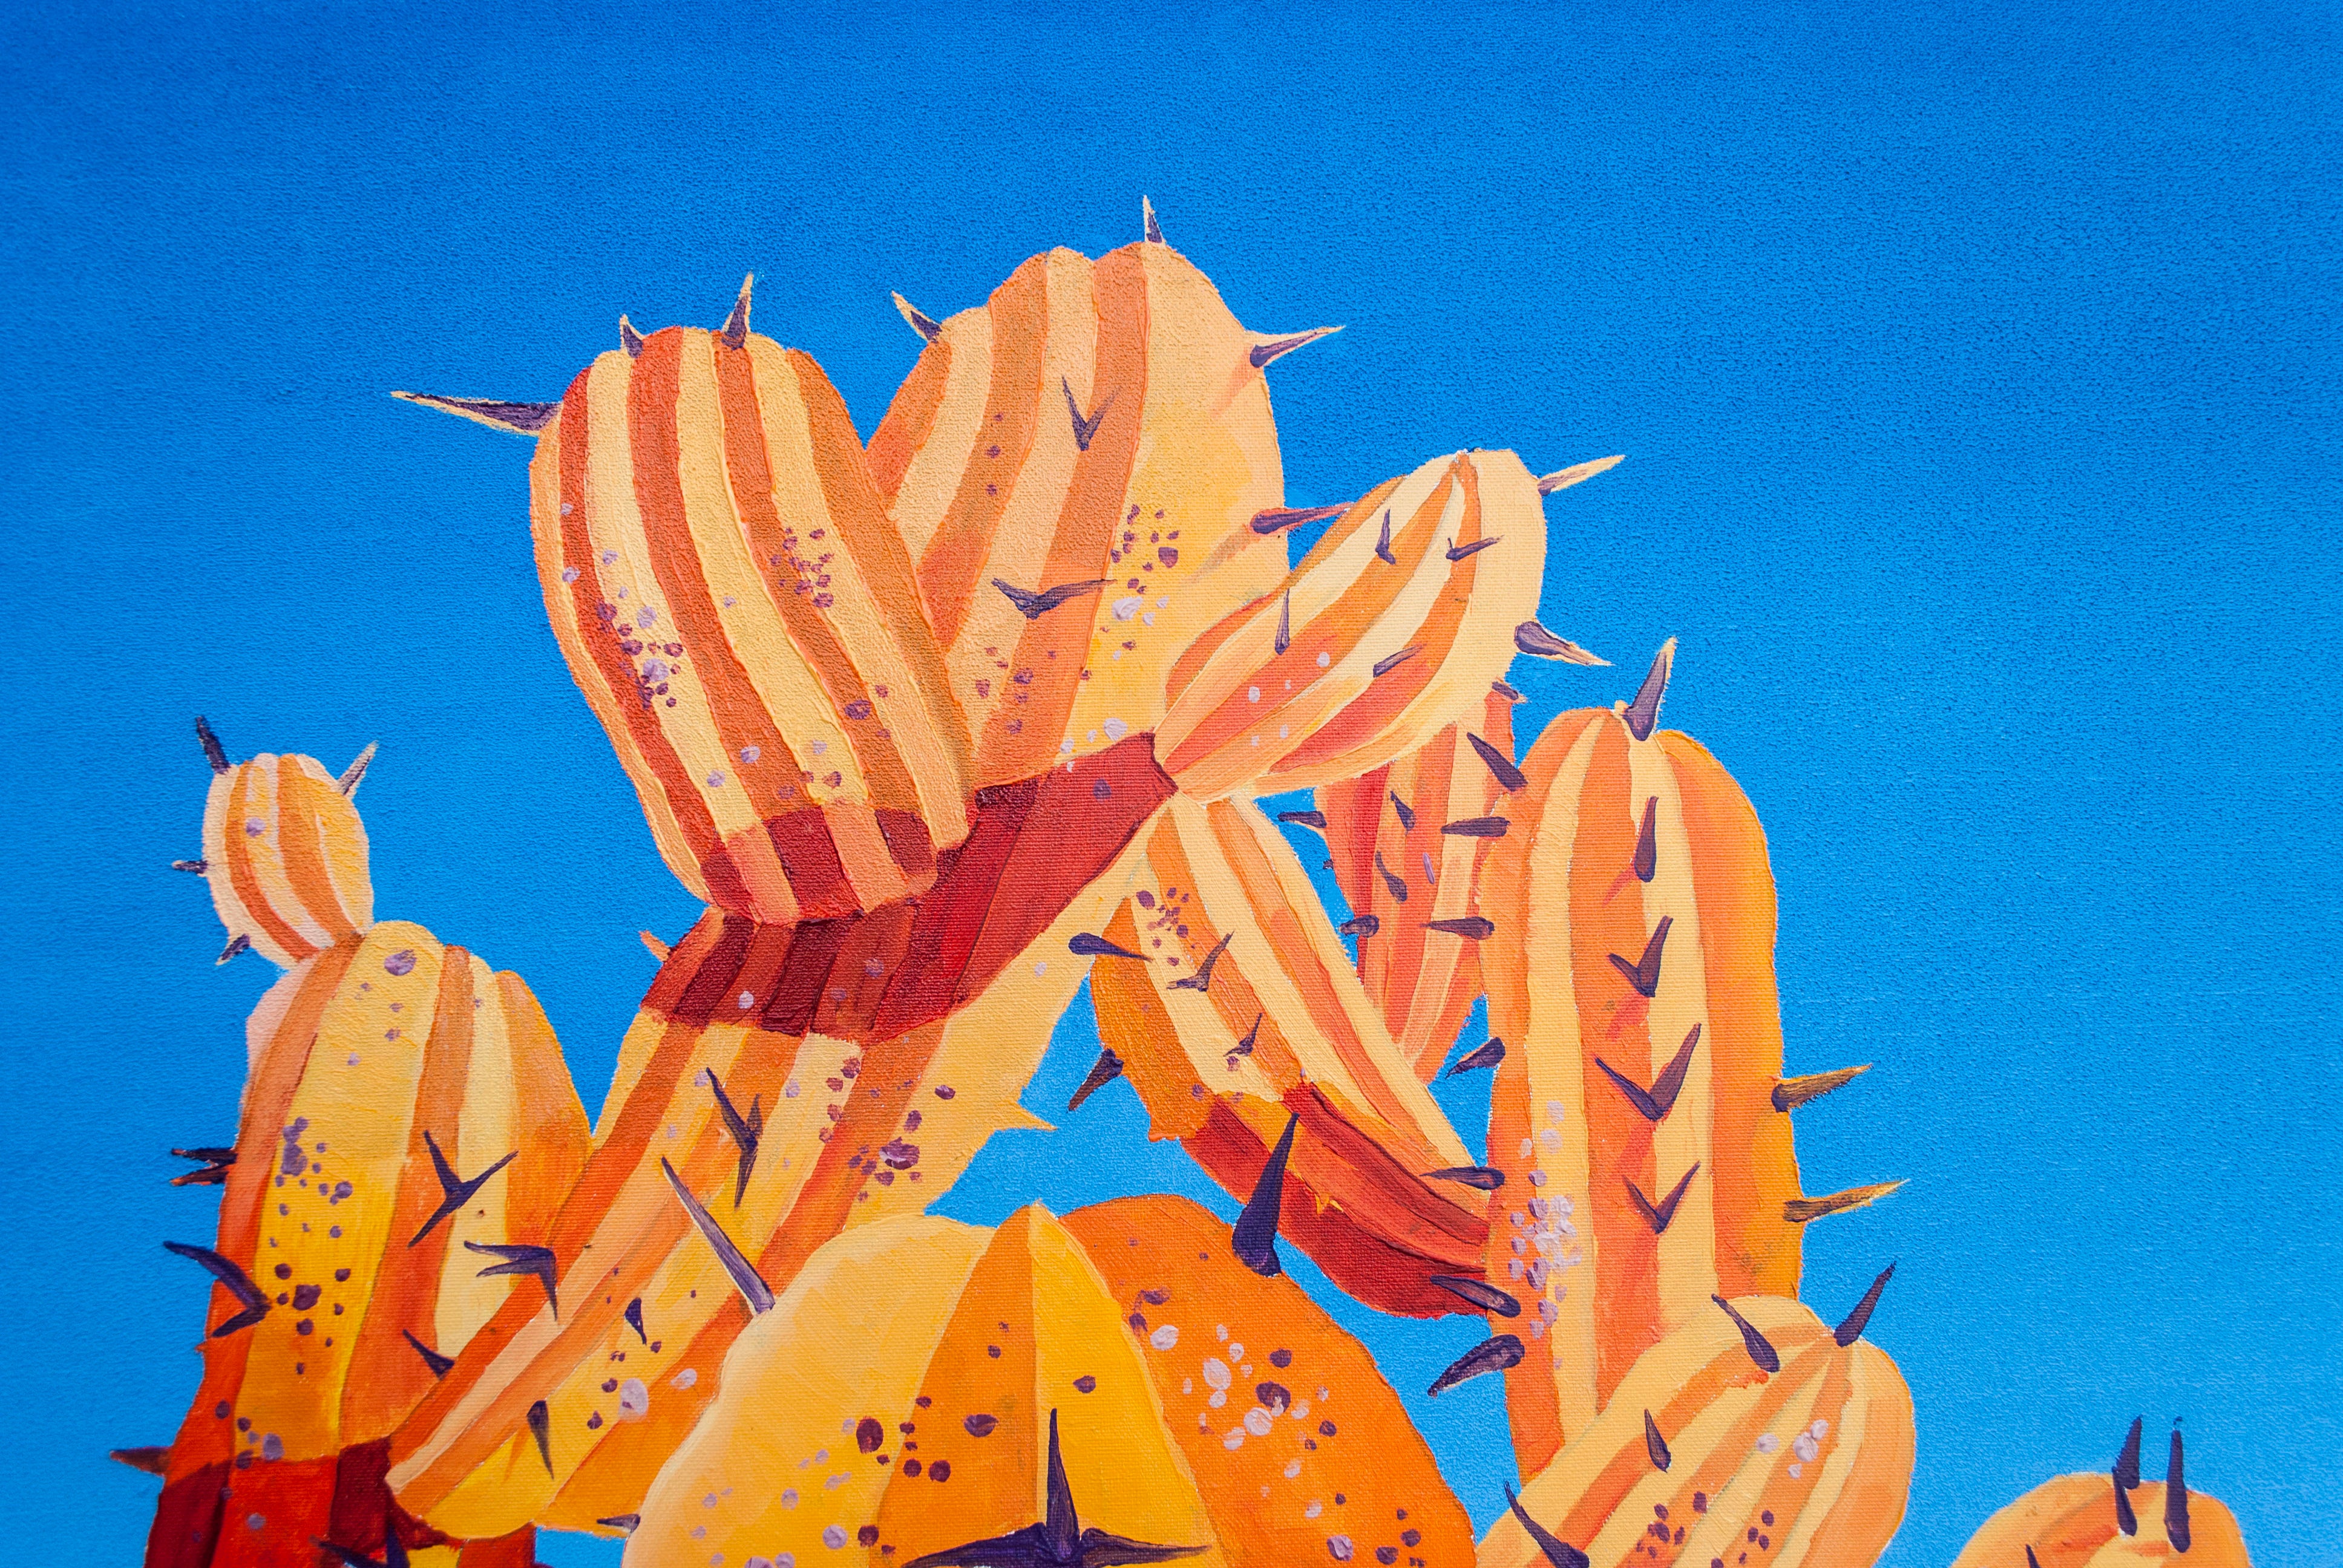 Detail view of Big Orange on Blue - beautiful cactus painting made in 2021 by Dominic Virtosu